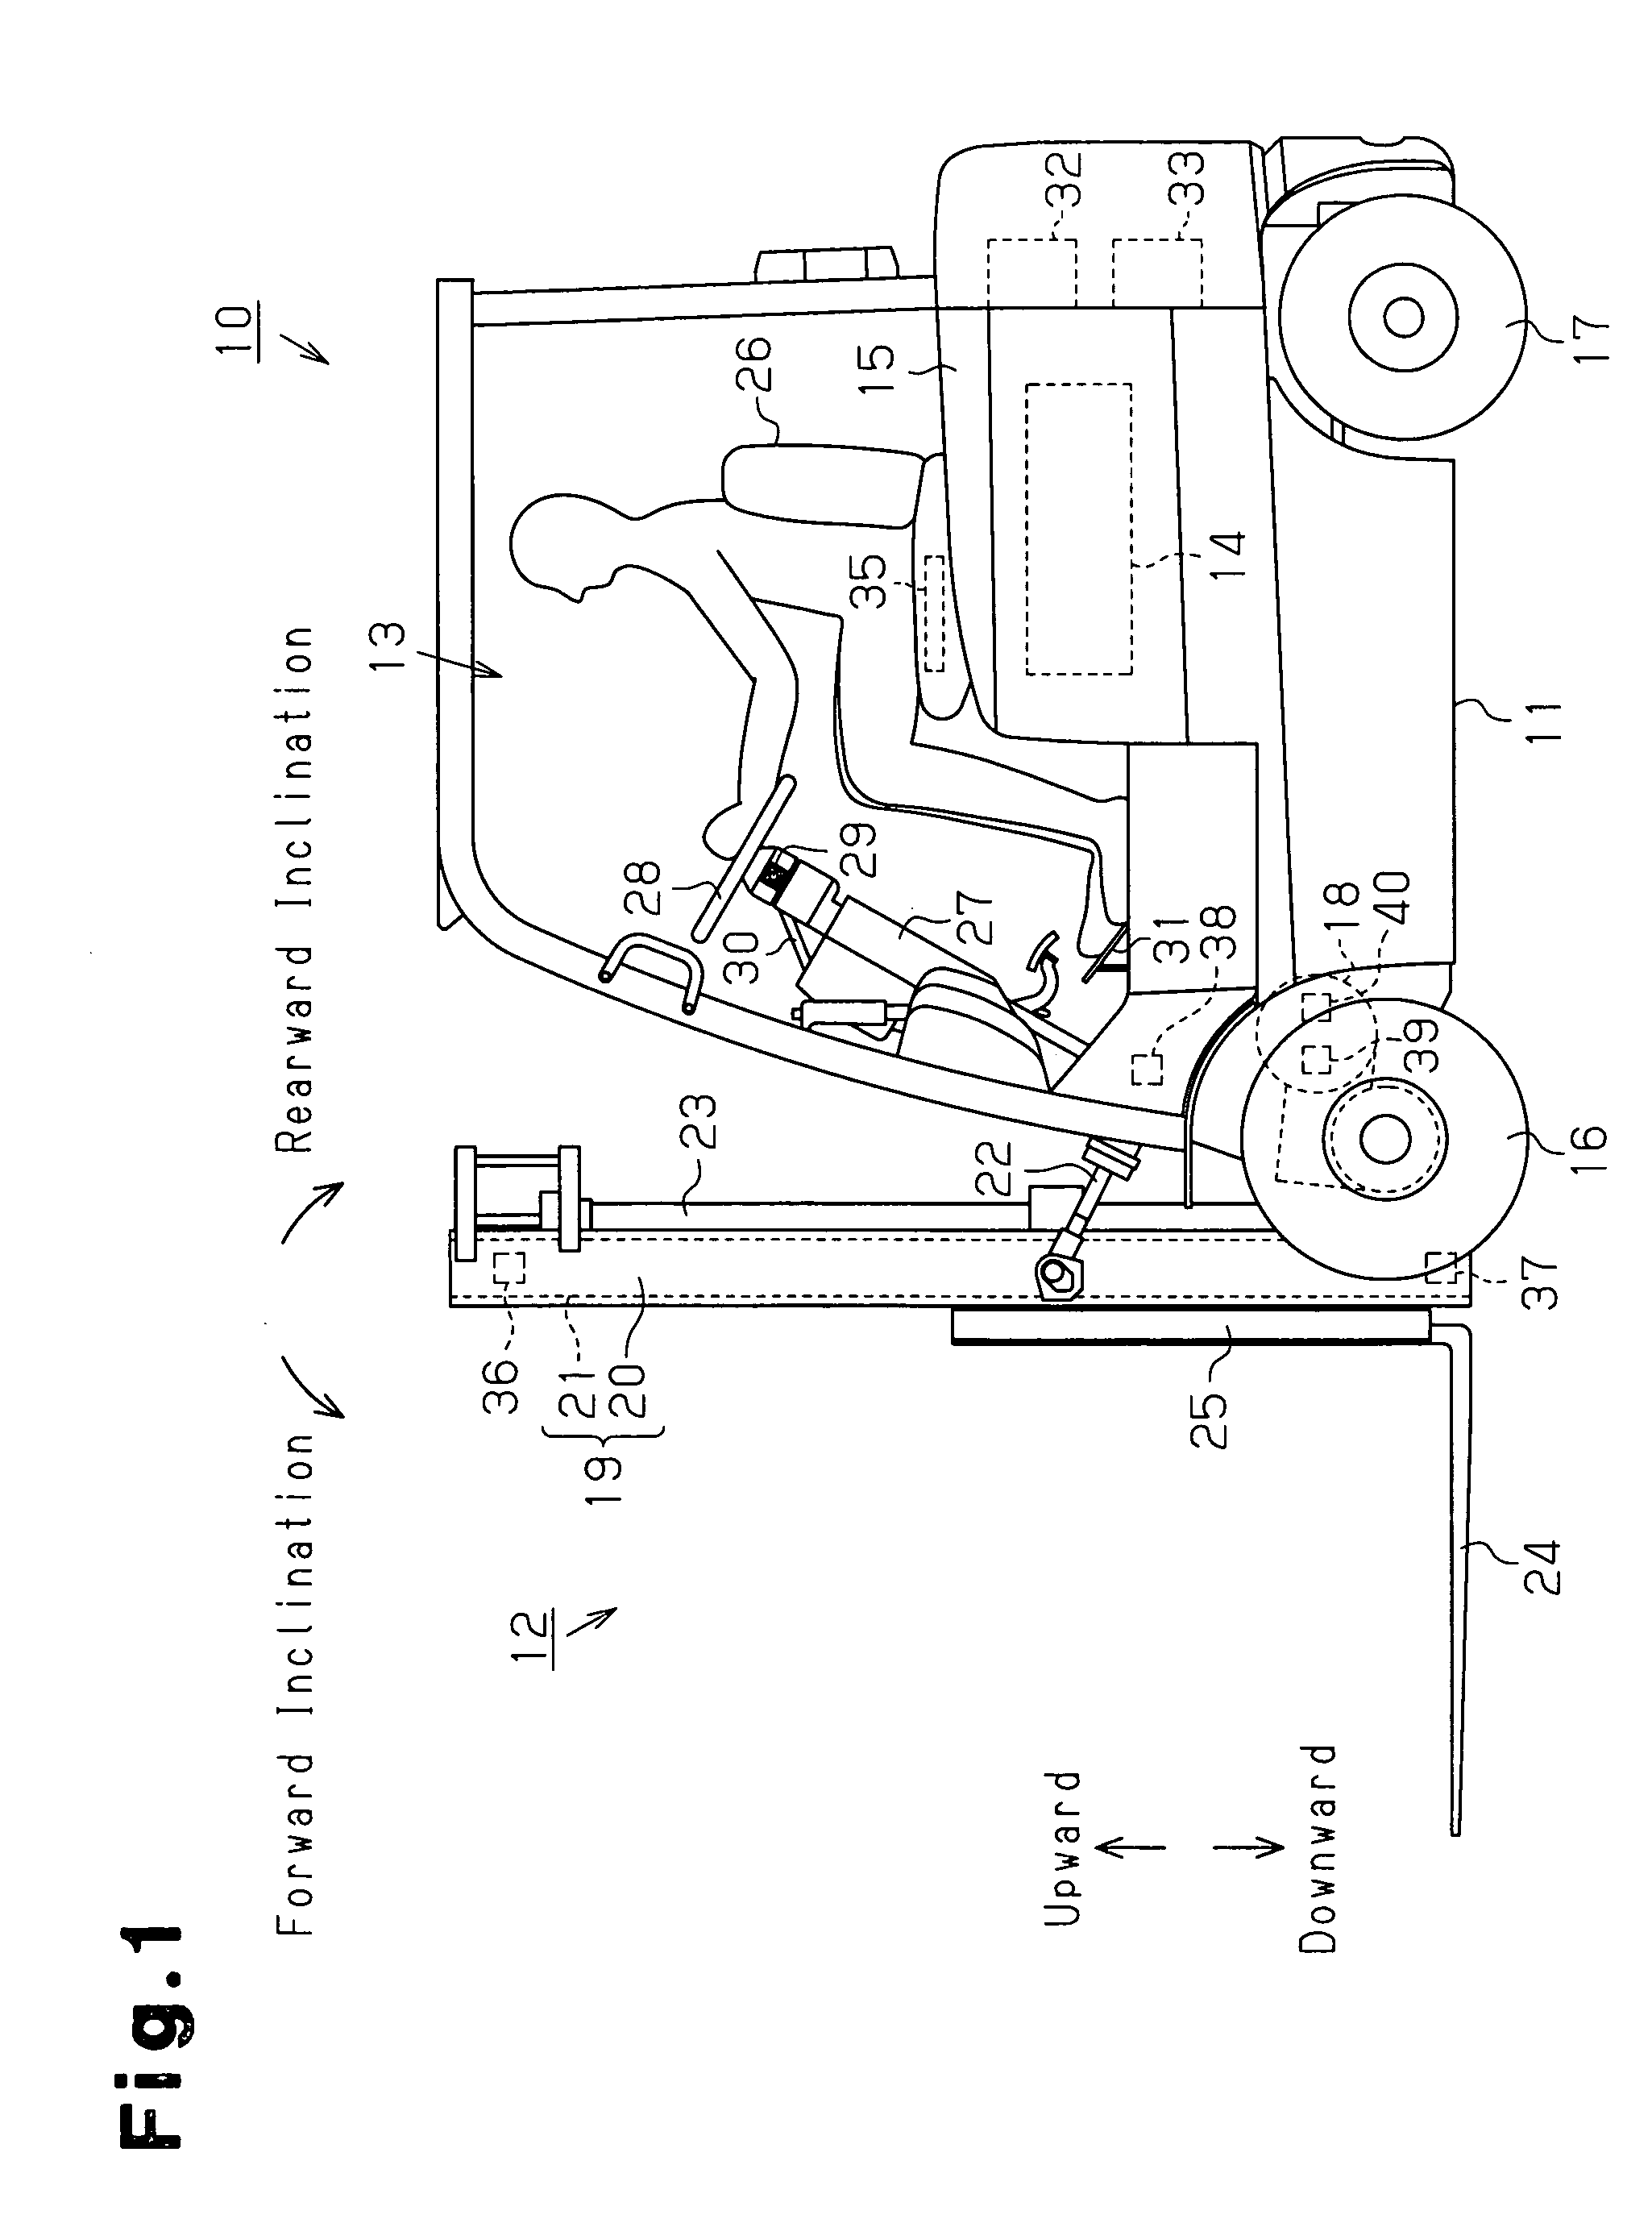 Travel control apparatus for industrial vehicle